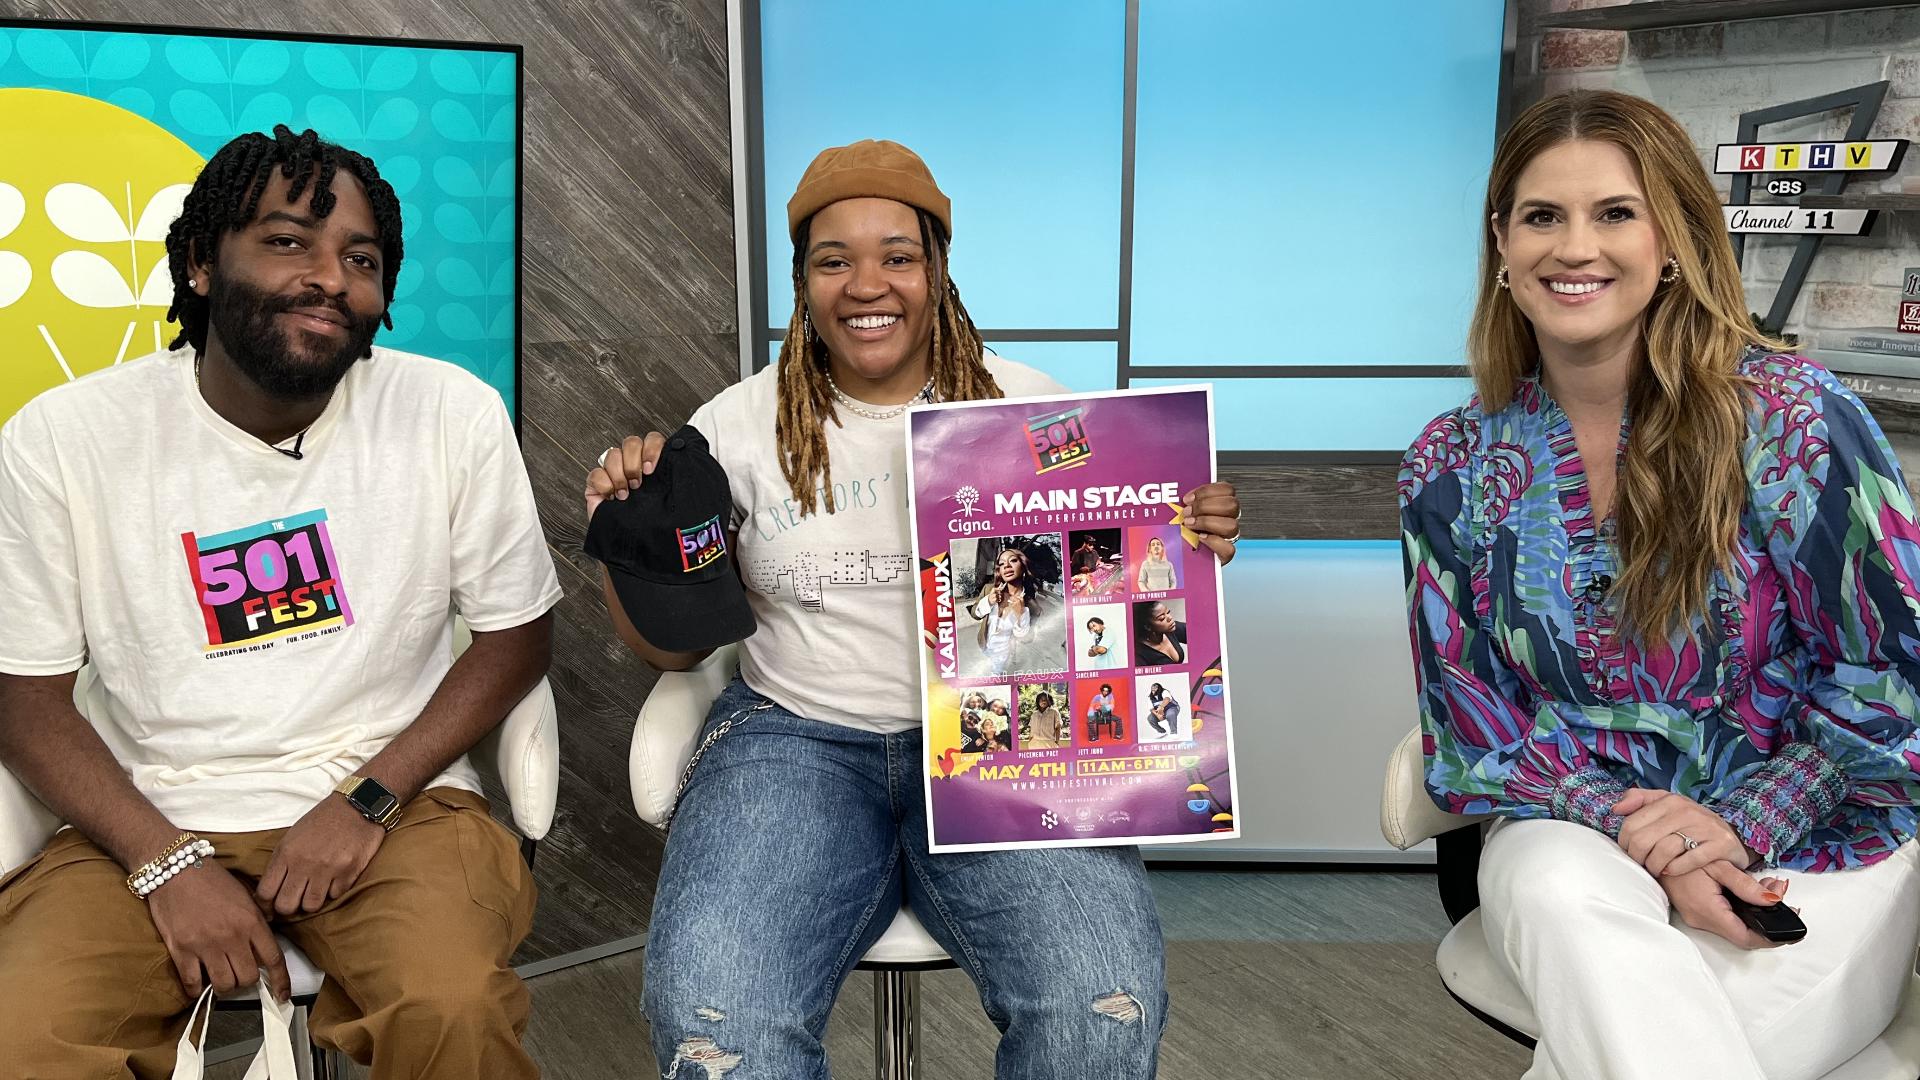 The Annual 501 Fest is back! Dazzmin "Dazz" Murry and Broderick Bozeman tell us more about this year's festivities.